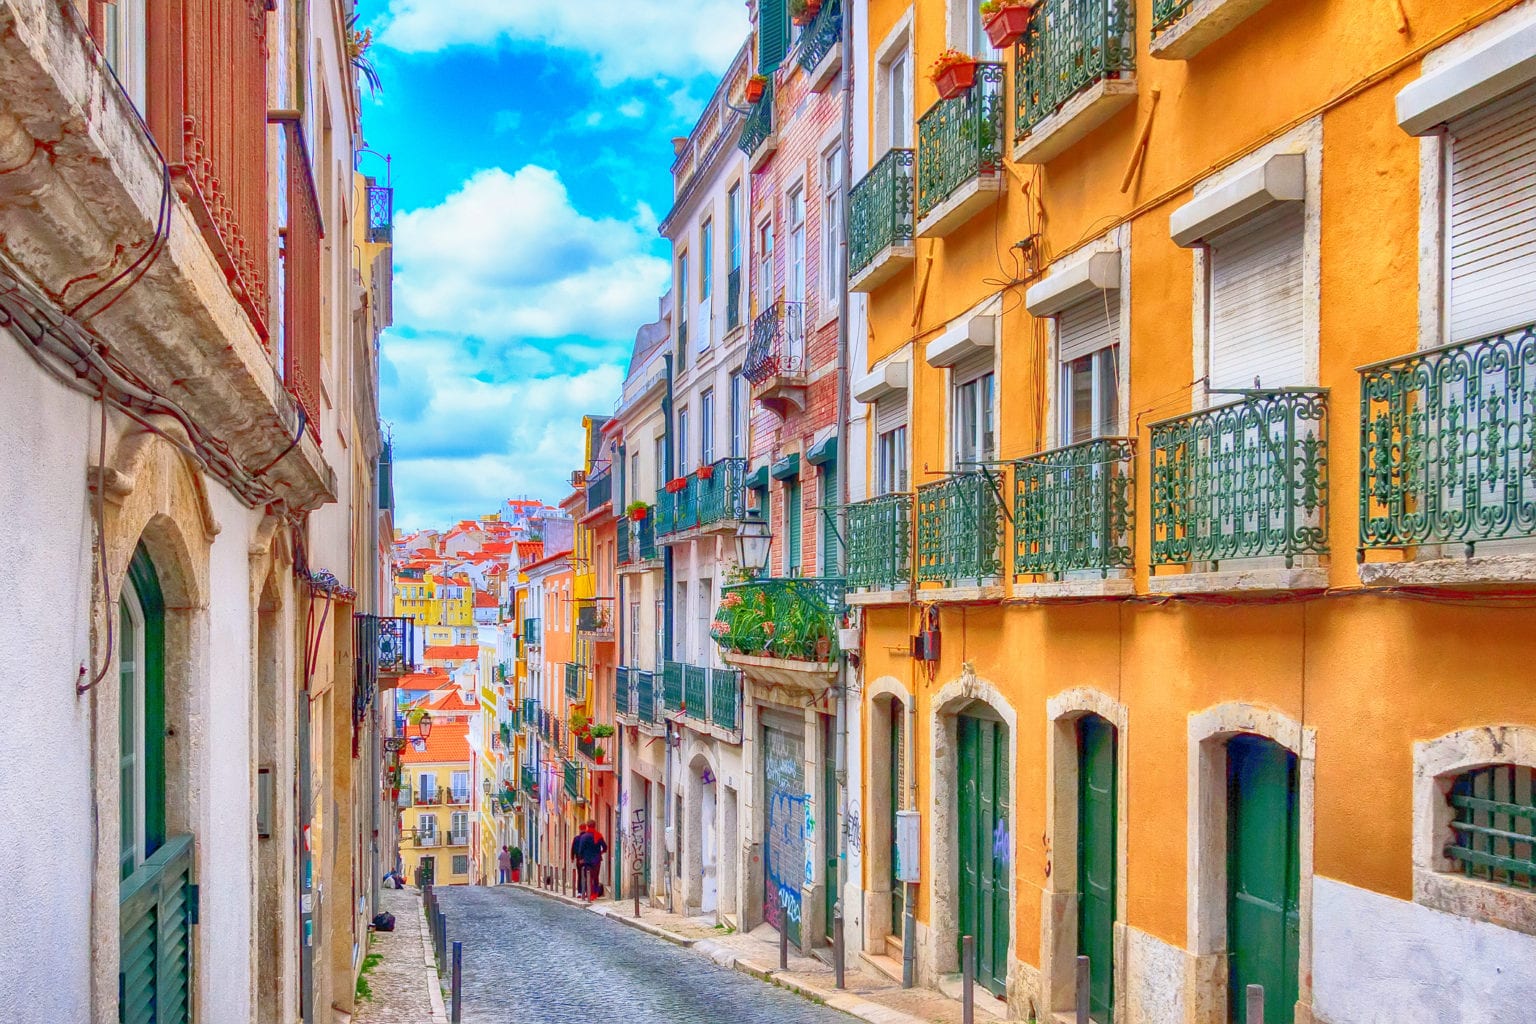 Cost of Living in Portugal A Foreigner's Guide